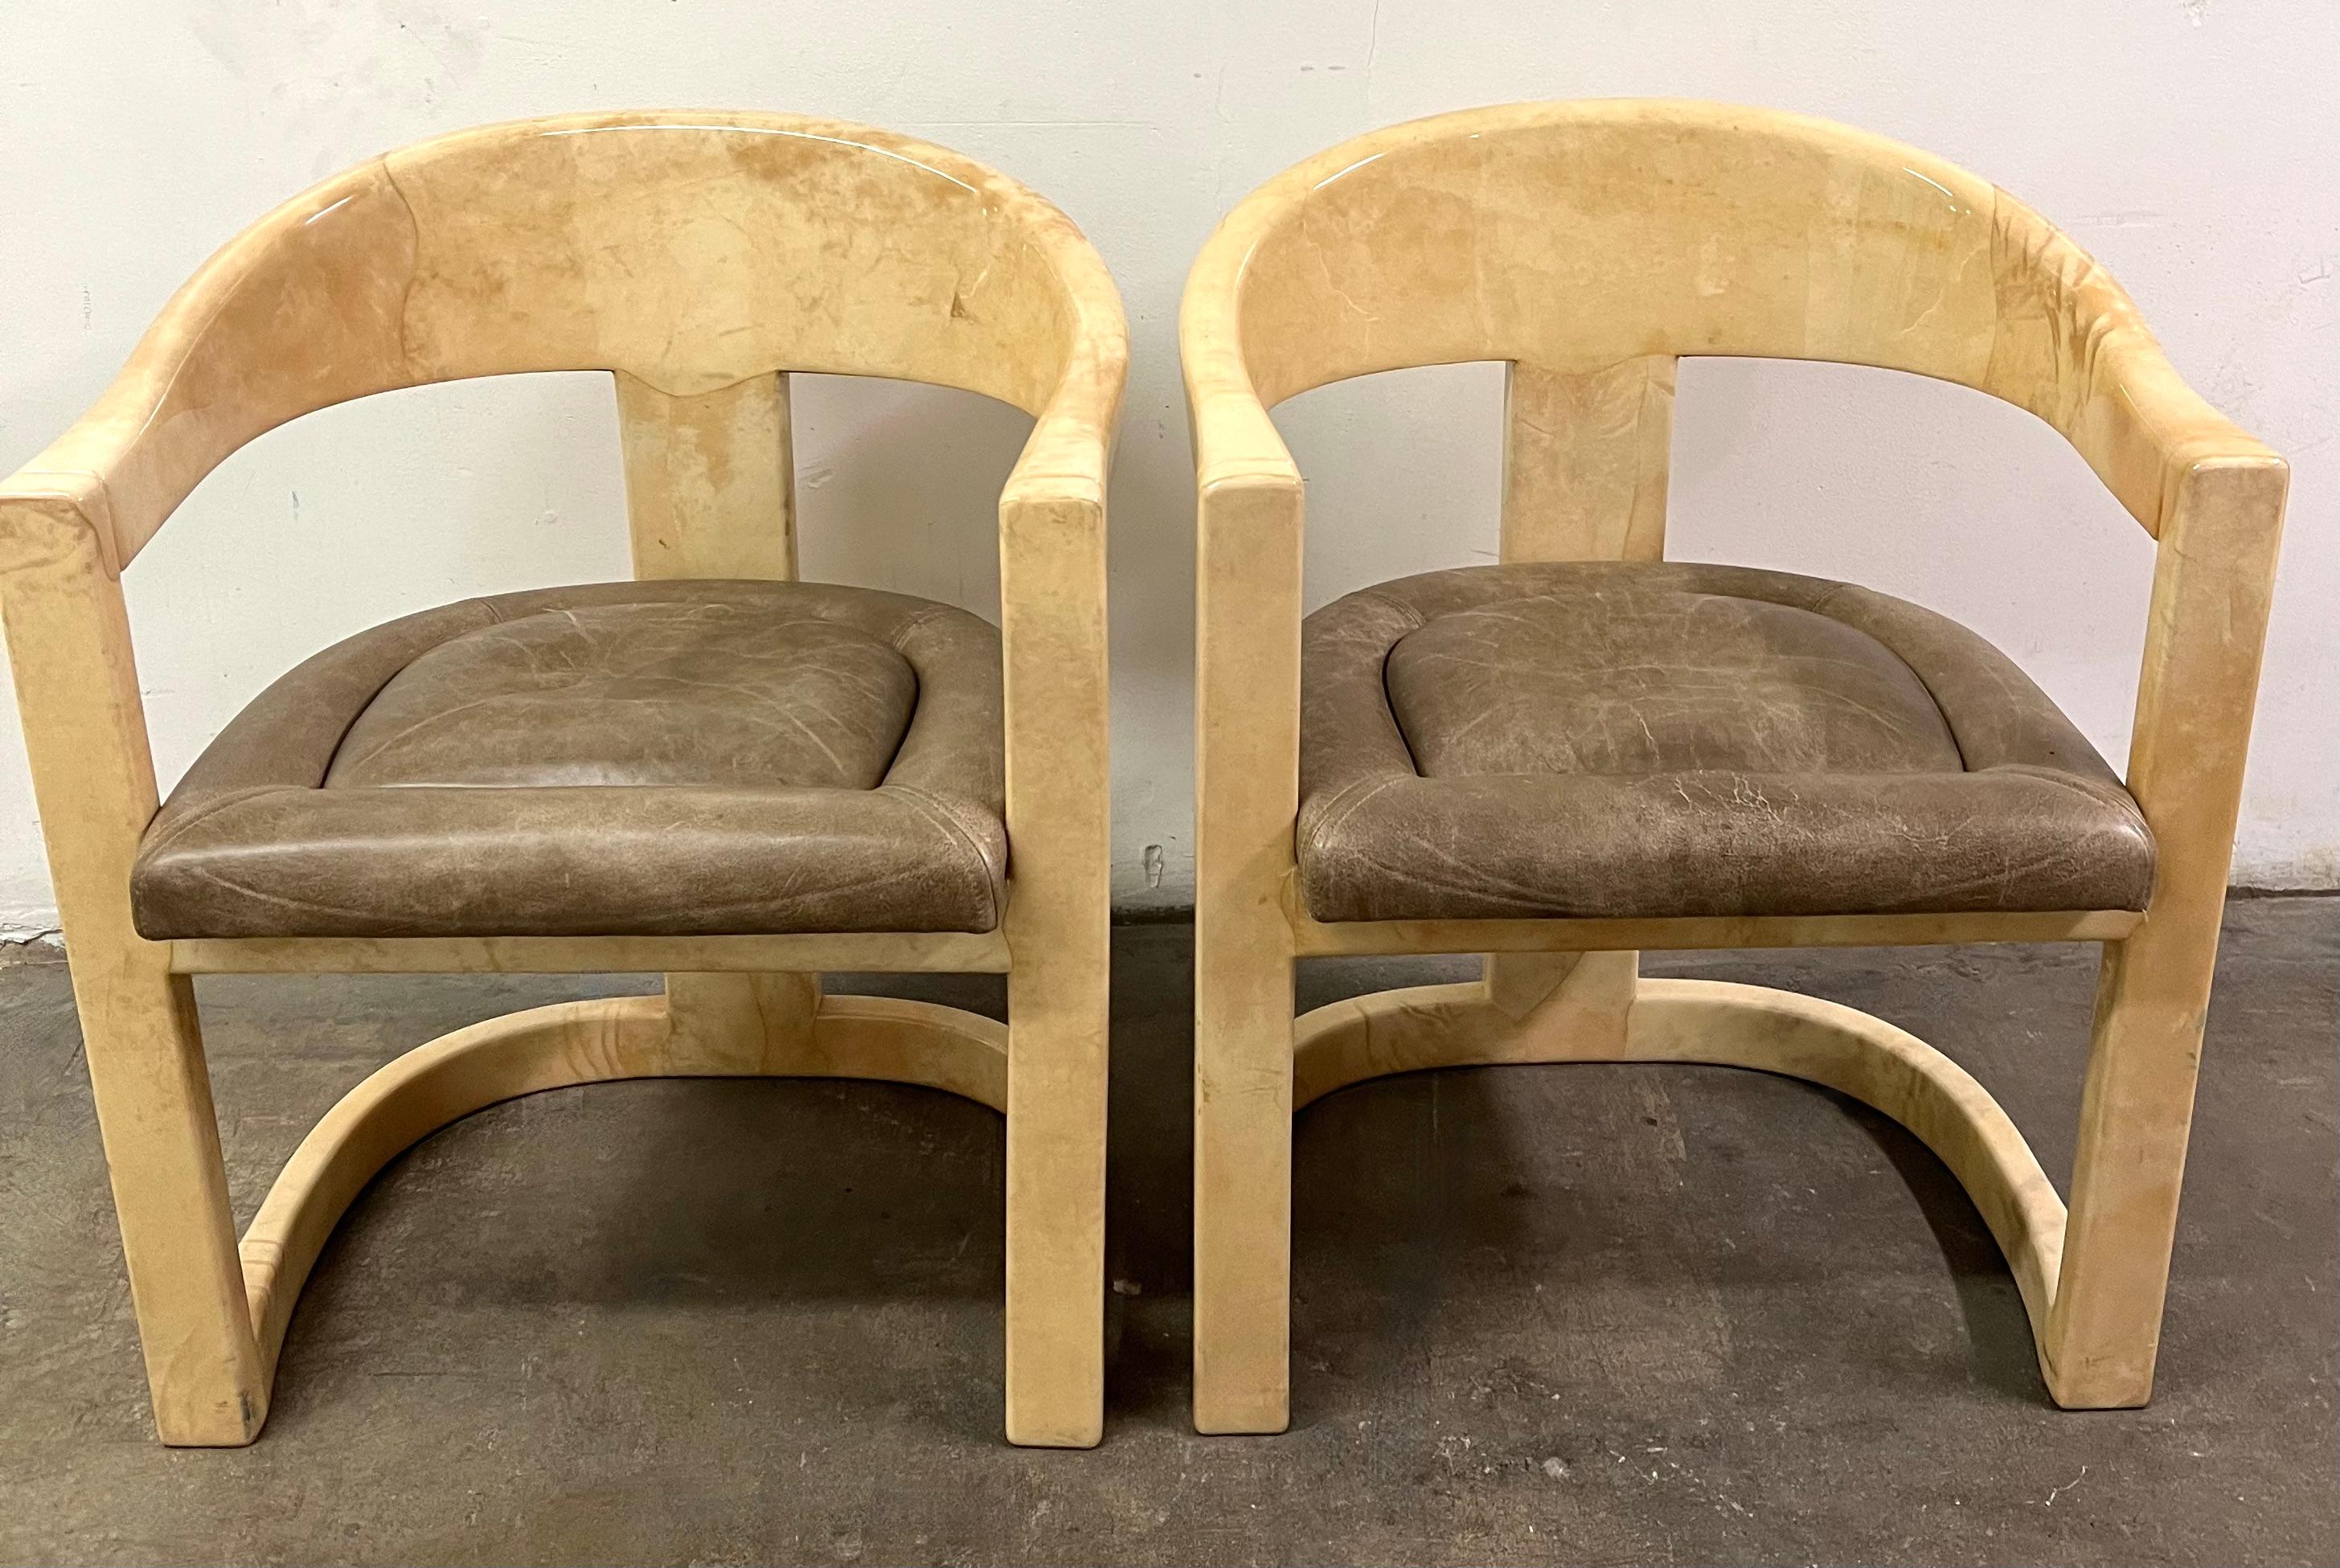 Pair of Karl Springer Goatskin Onassis Chairs with Leather Upholstered Seats For Sale 2